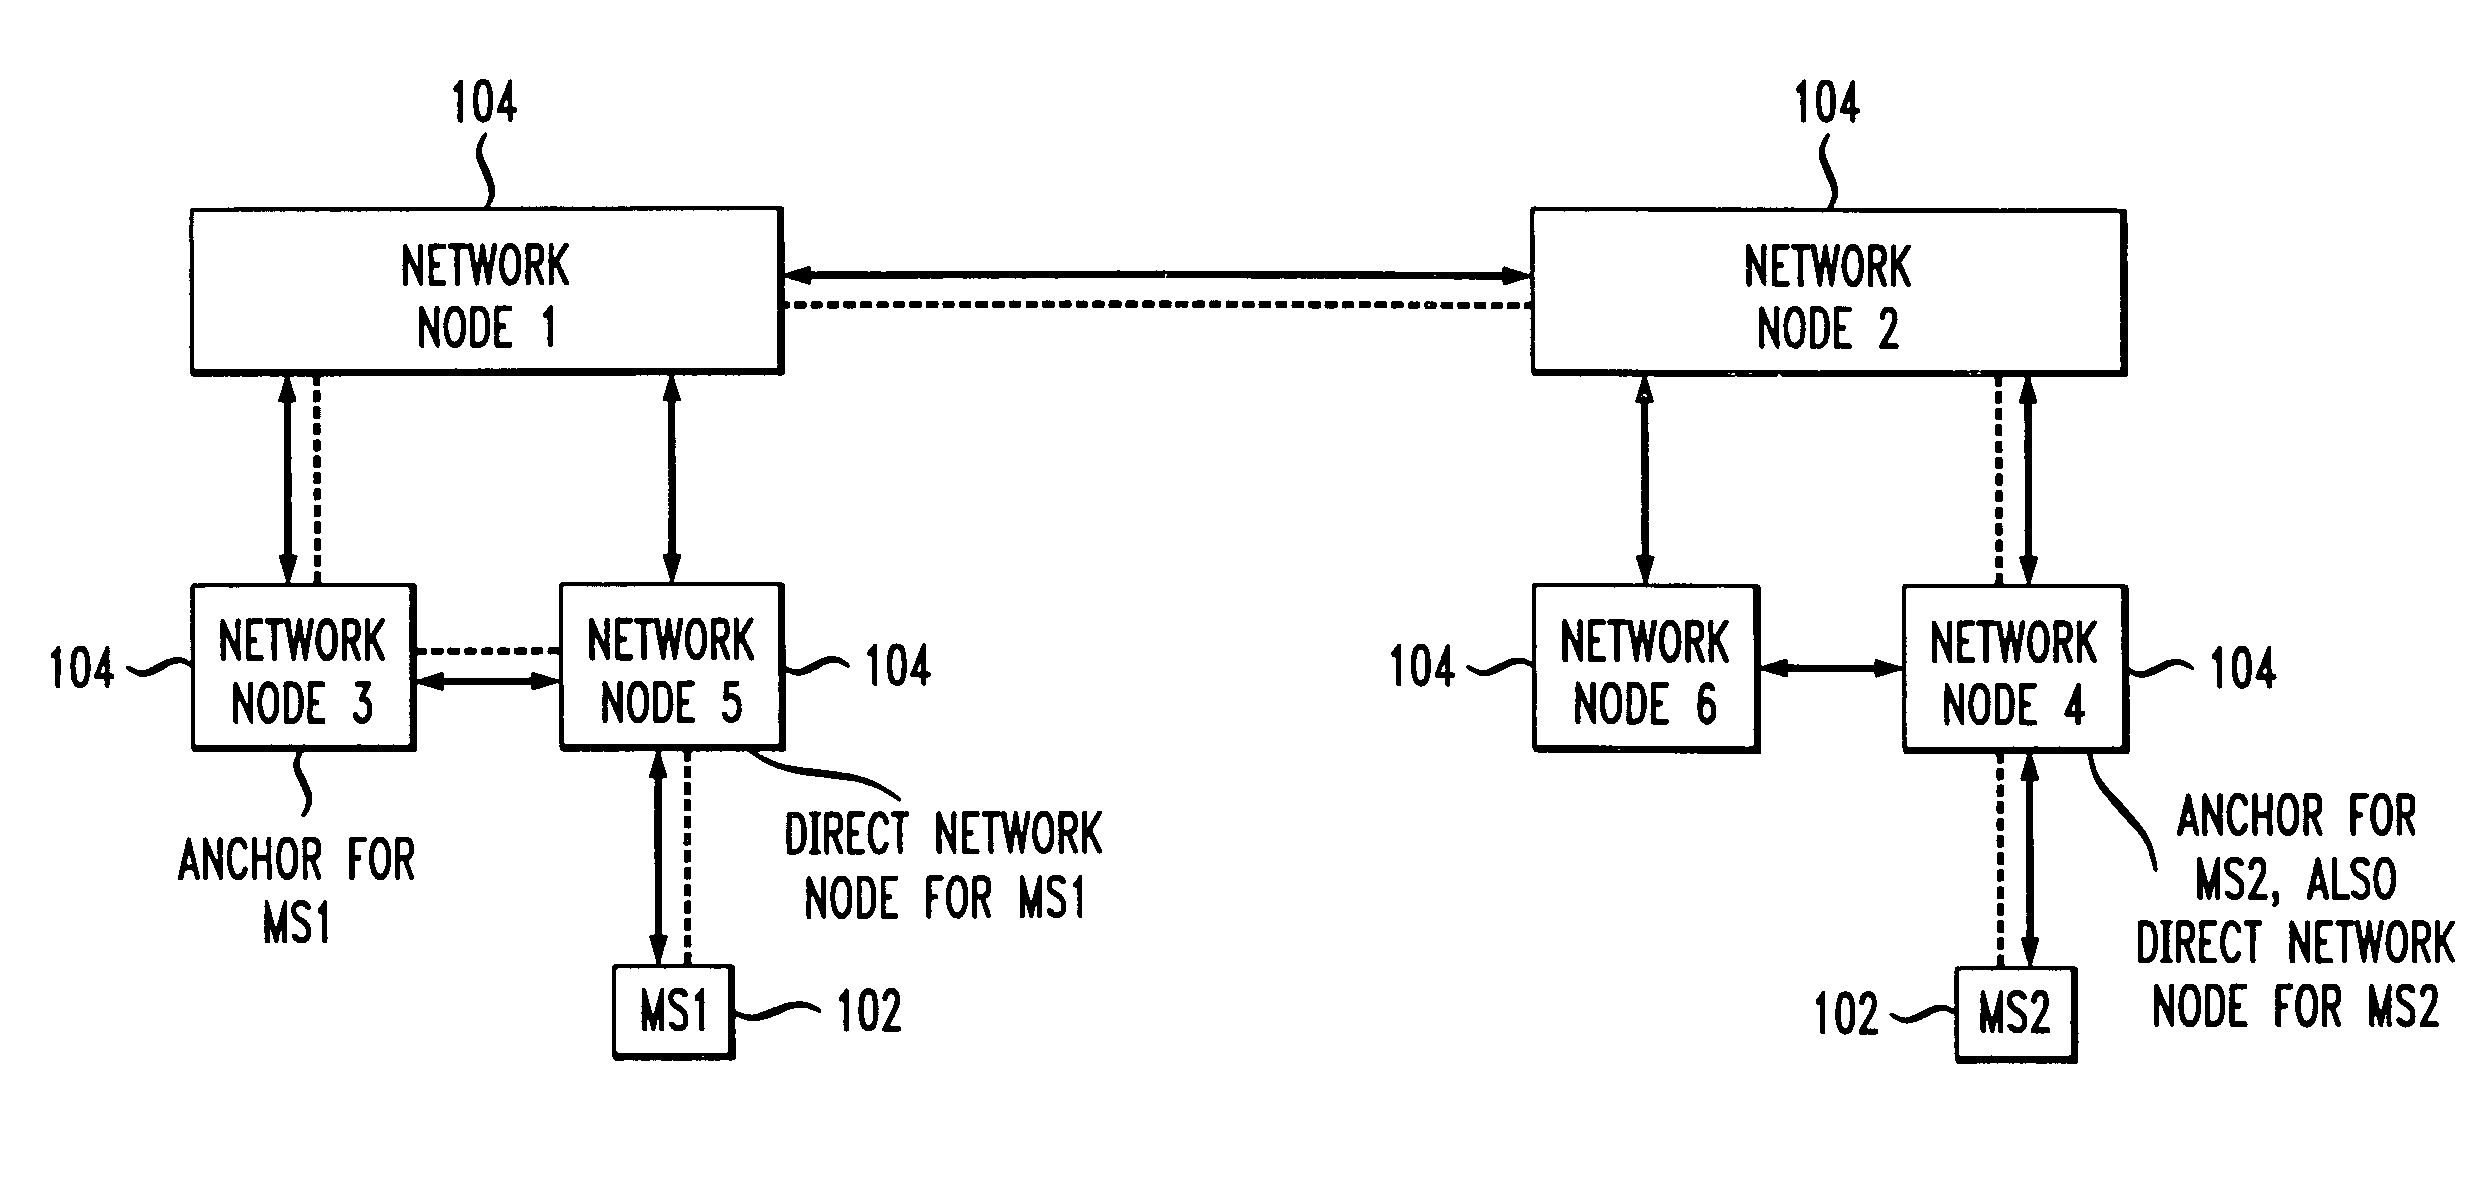 Addressing scheme for a multimedia mobile network